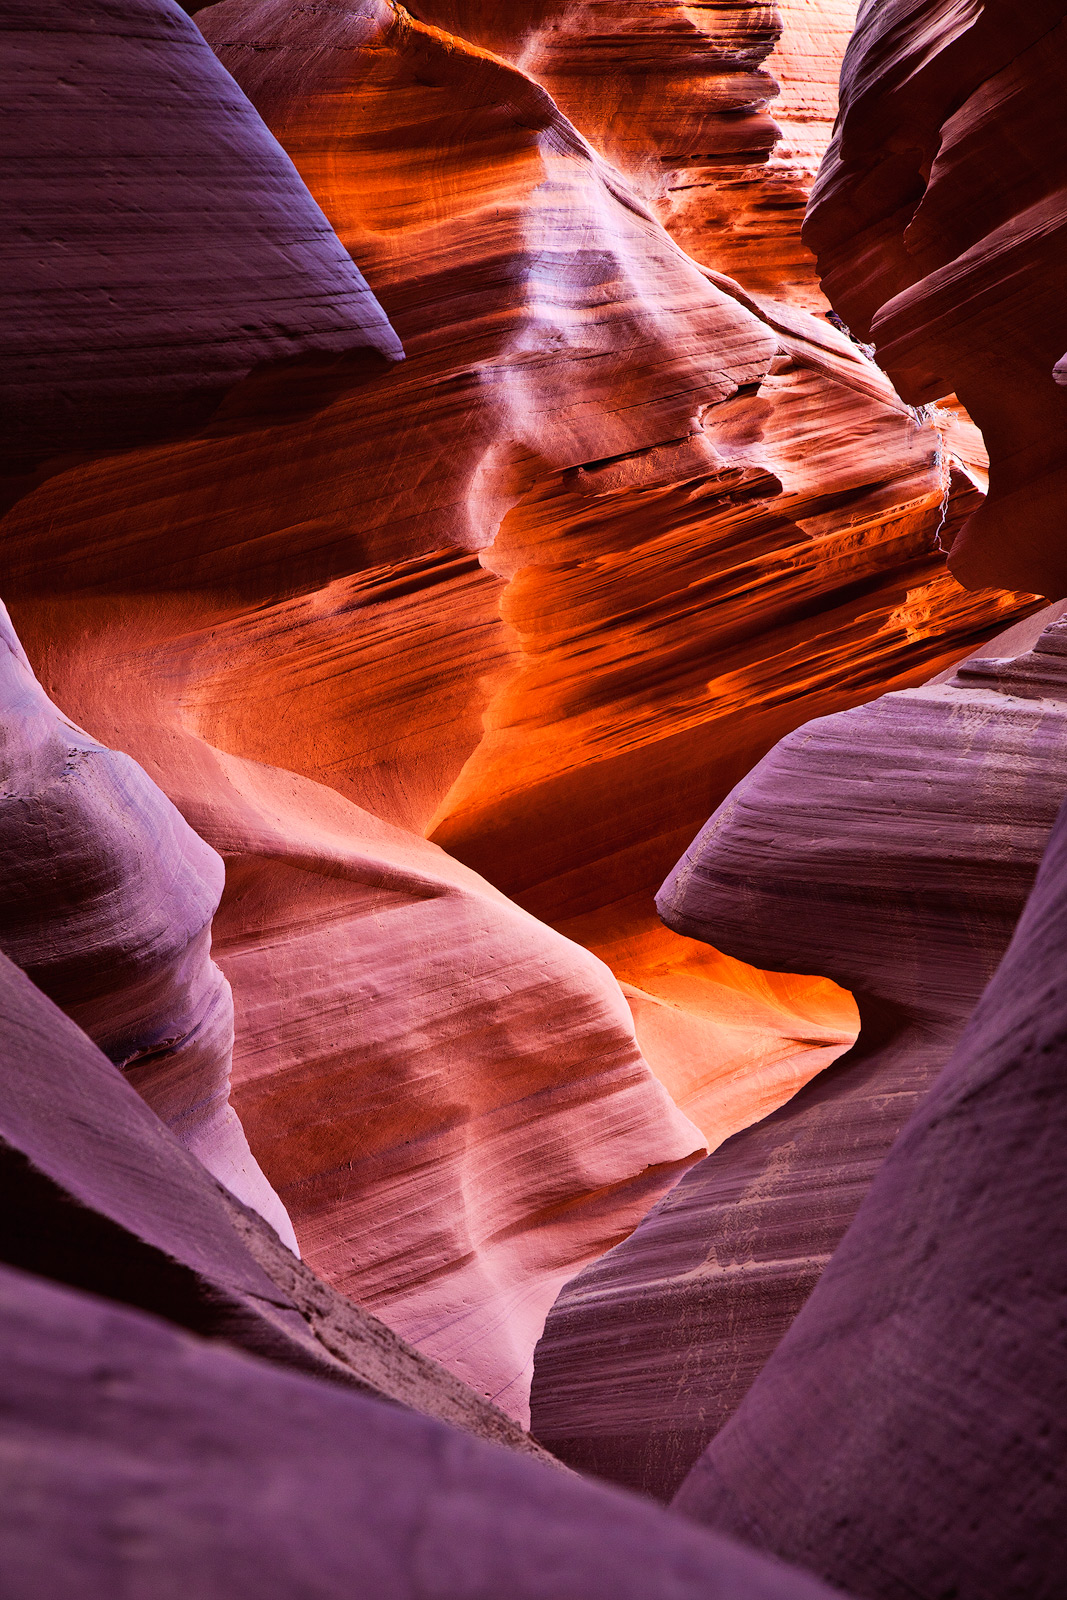 Jagged walls form a path inside Lower Antelope Canyon